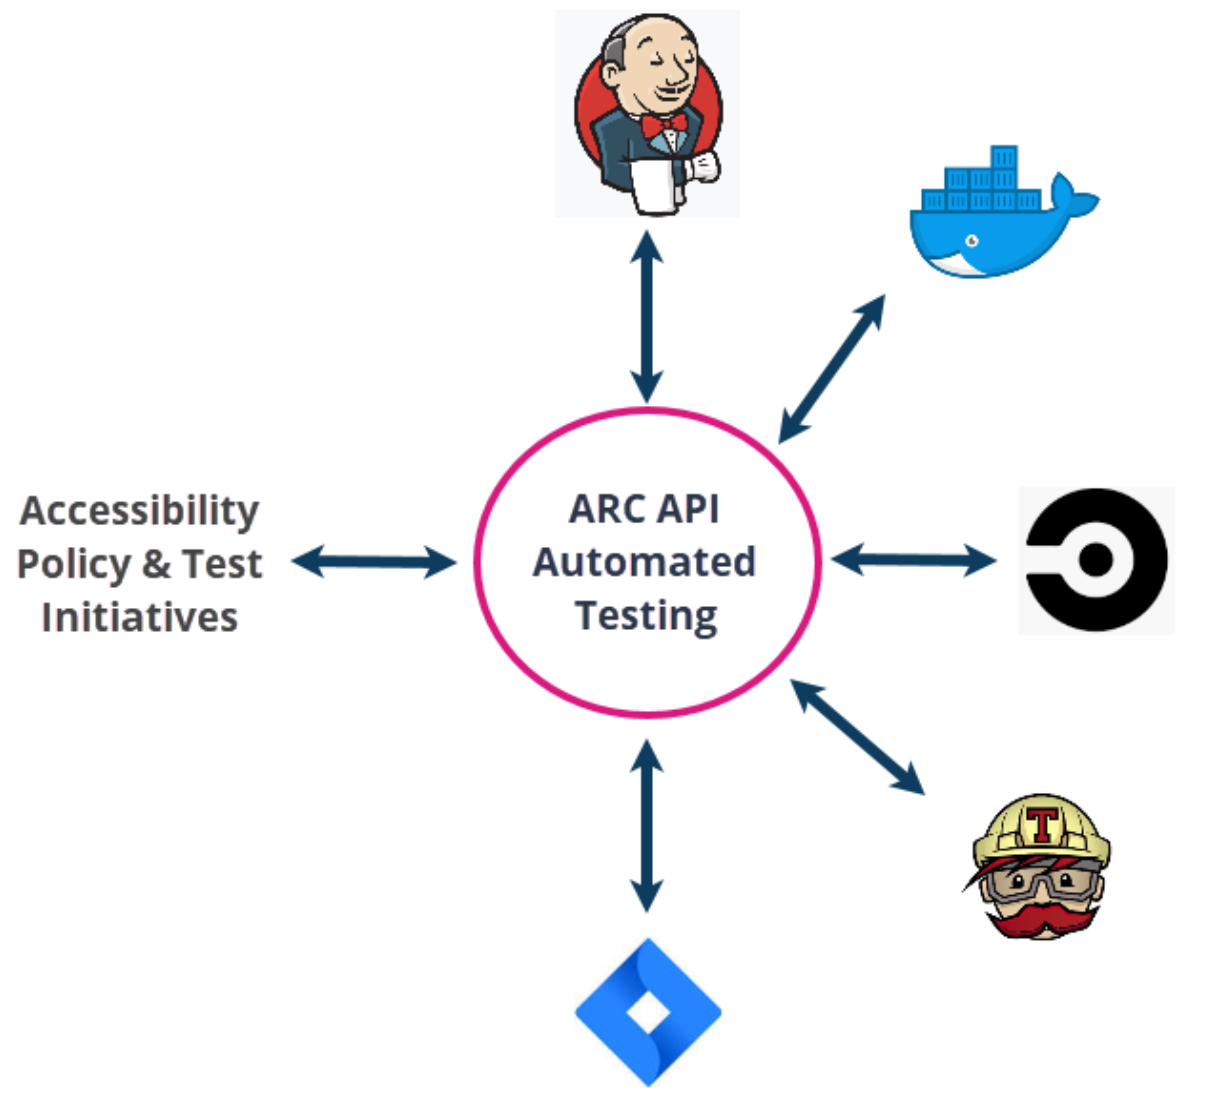 API Integrations chart. ARC API allows you to integrate accessibility into your CICD platform.